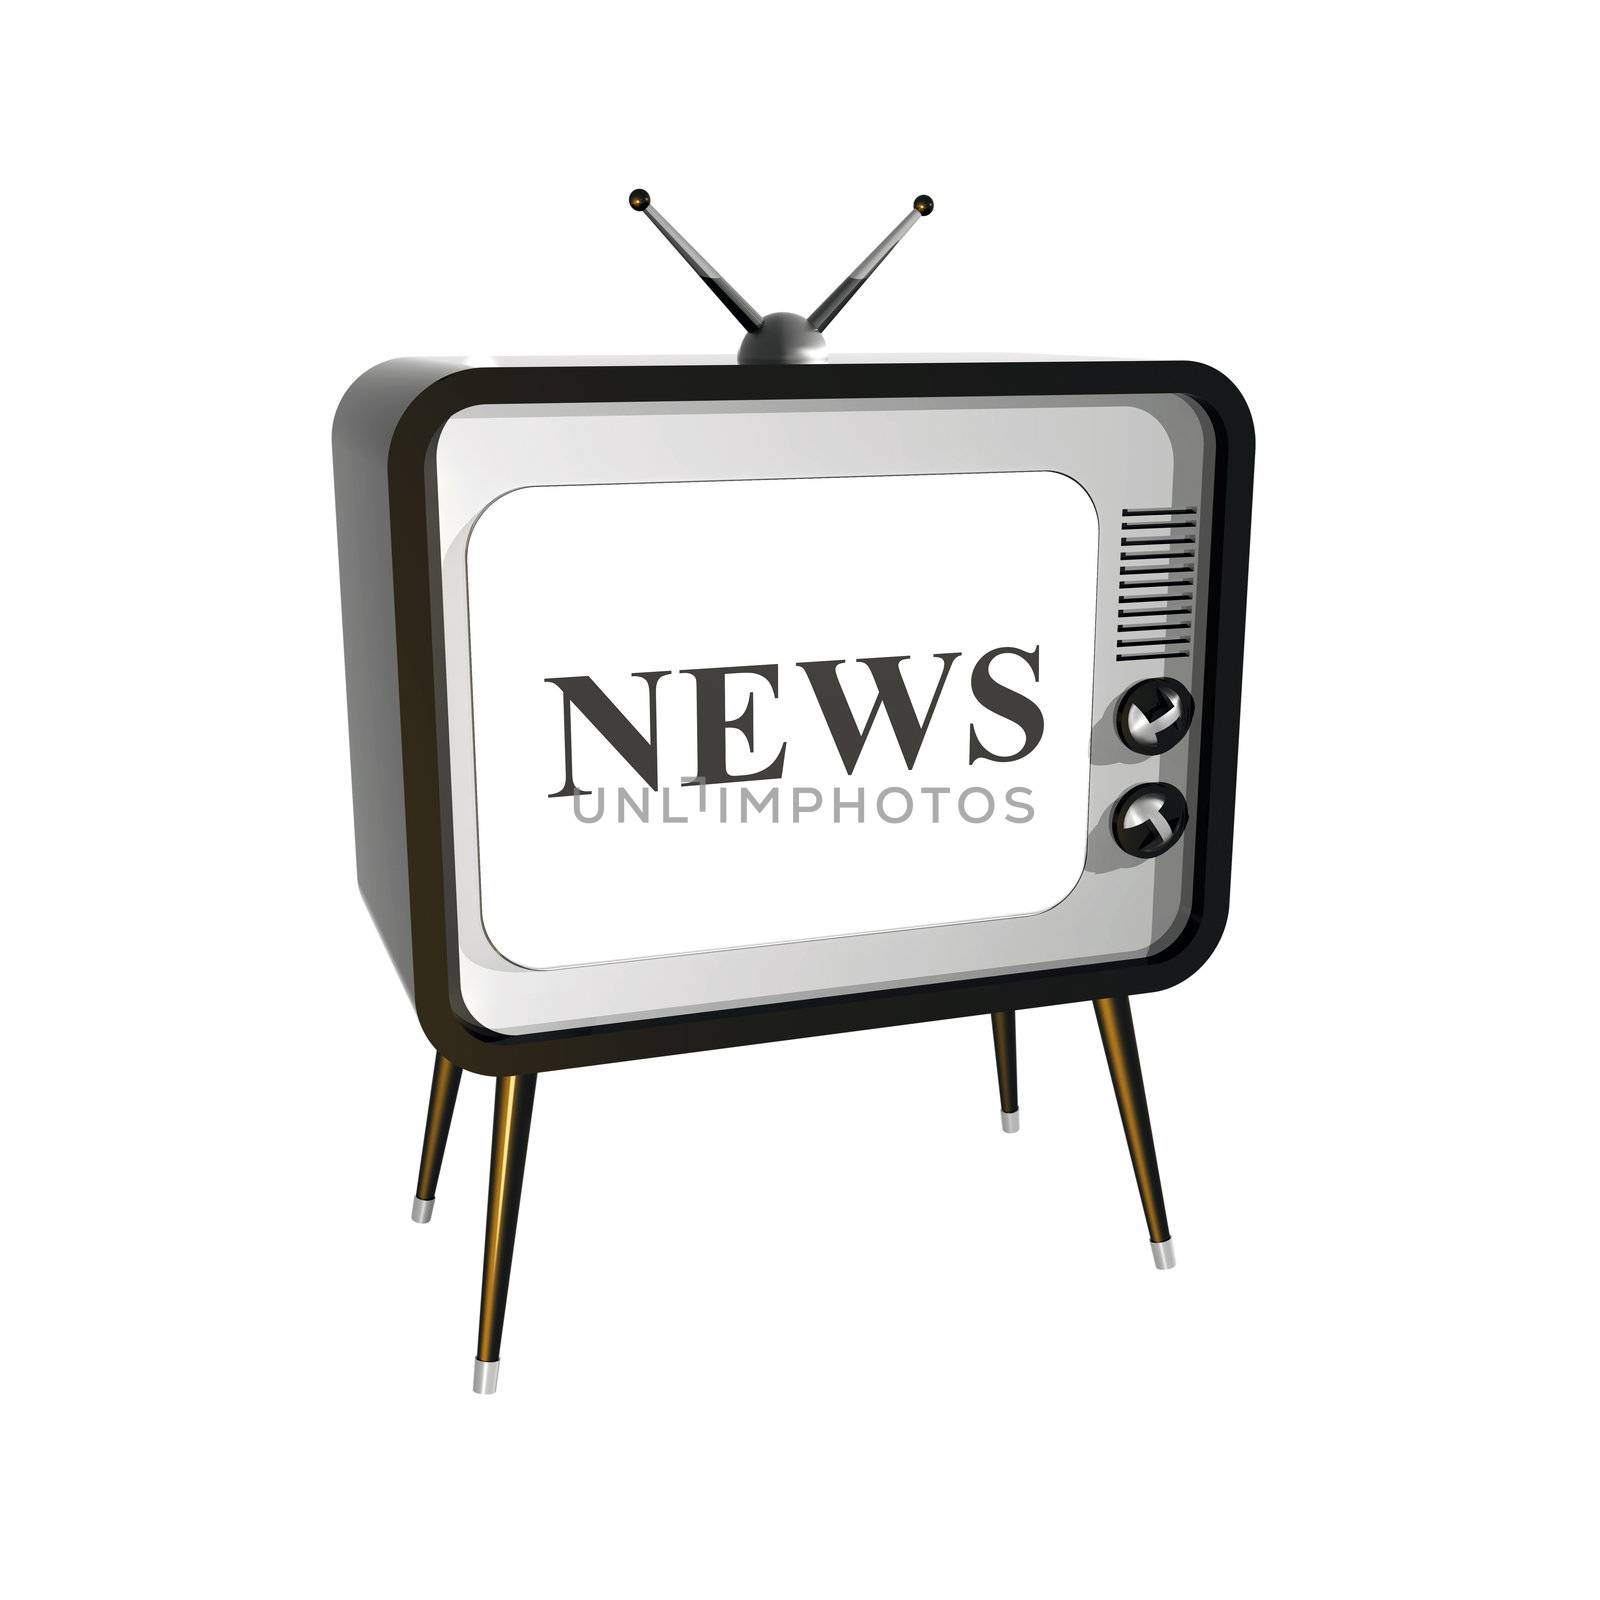 3D illustration of retro TV showing NEWS on screen